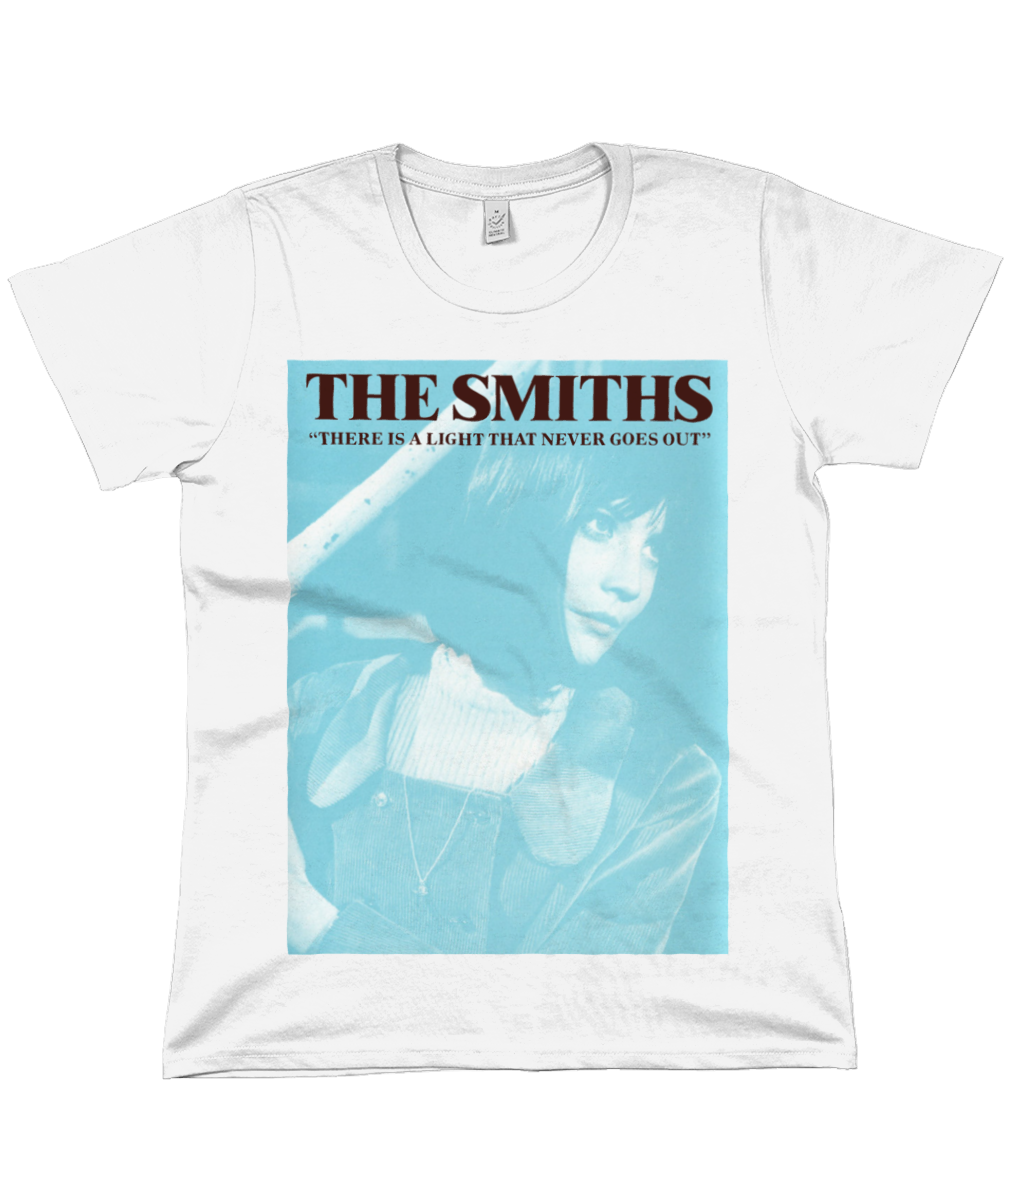 THE SMITHS - THERE IS A LIGHT THAT NEVER GOES OUT - 1992 - Top Text - Women's T Shirt